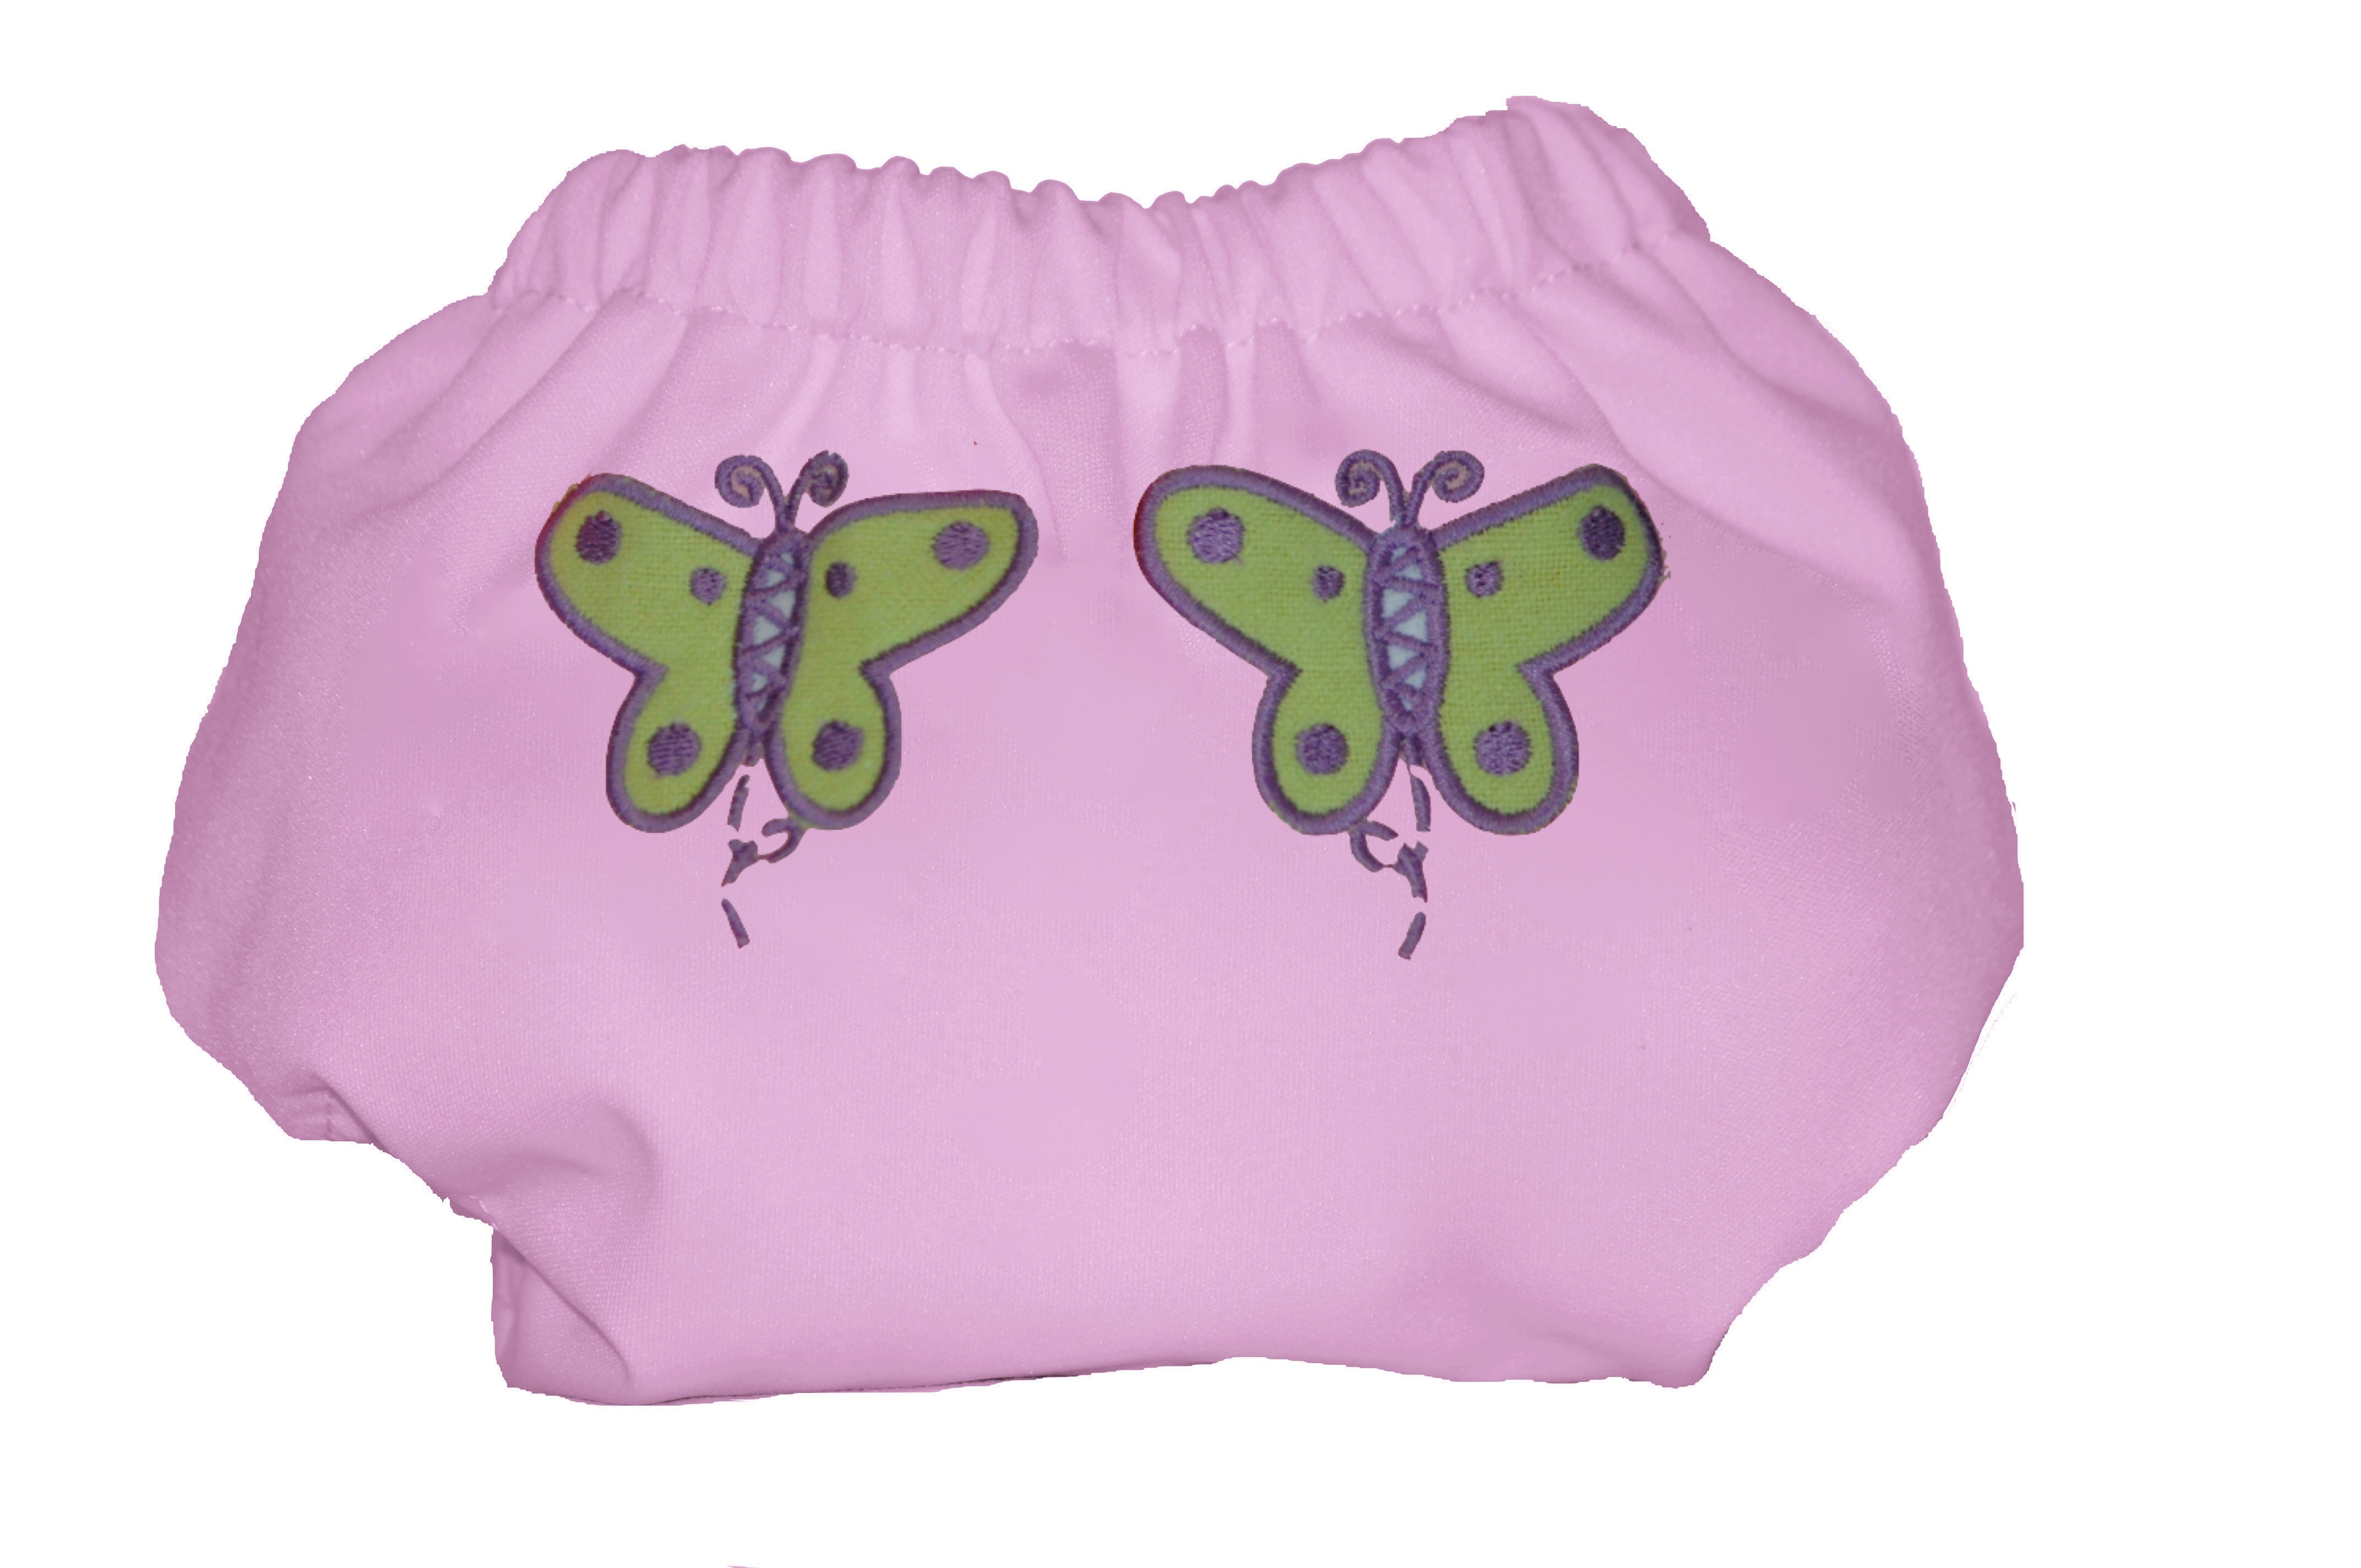 AllComfy One Size Diaper Cover Velcro Closure (2 Pack) "Adorable"